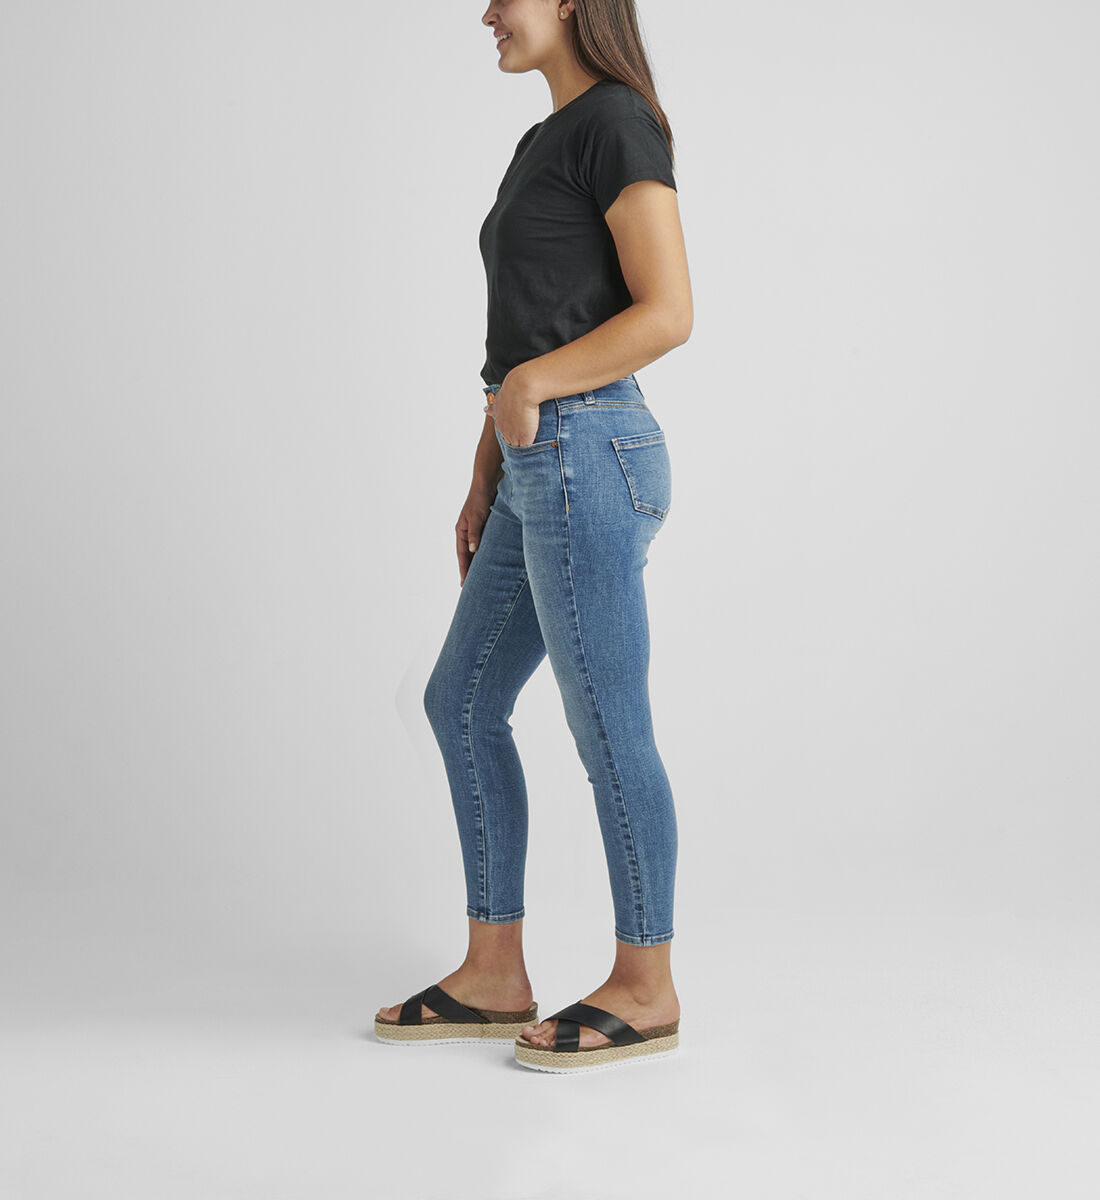 Valentina High Rise Skinny Crop Pull-On Jeans Side